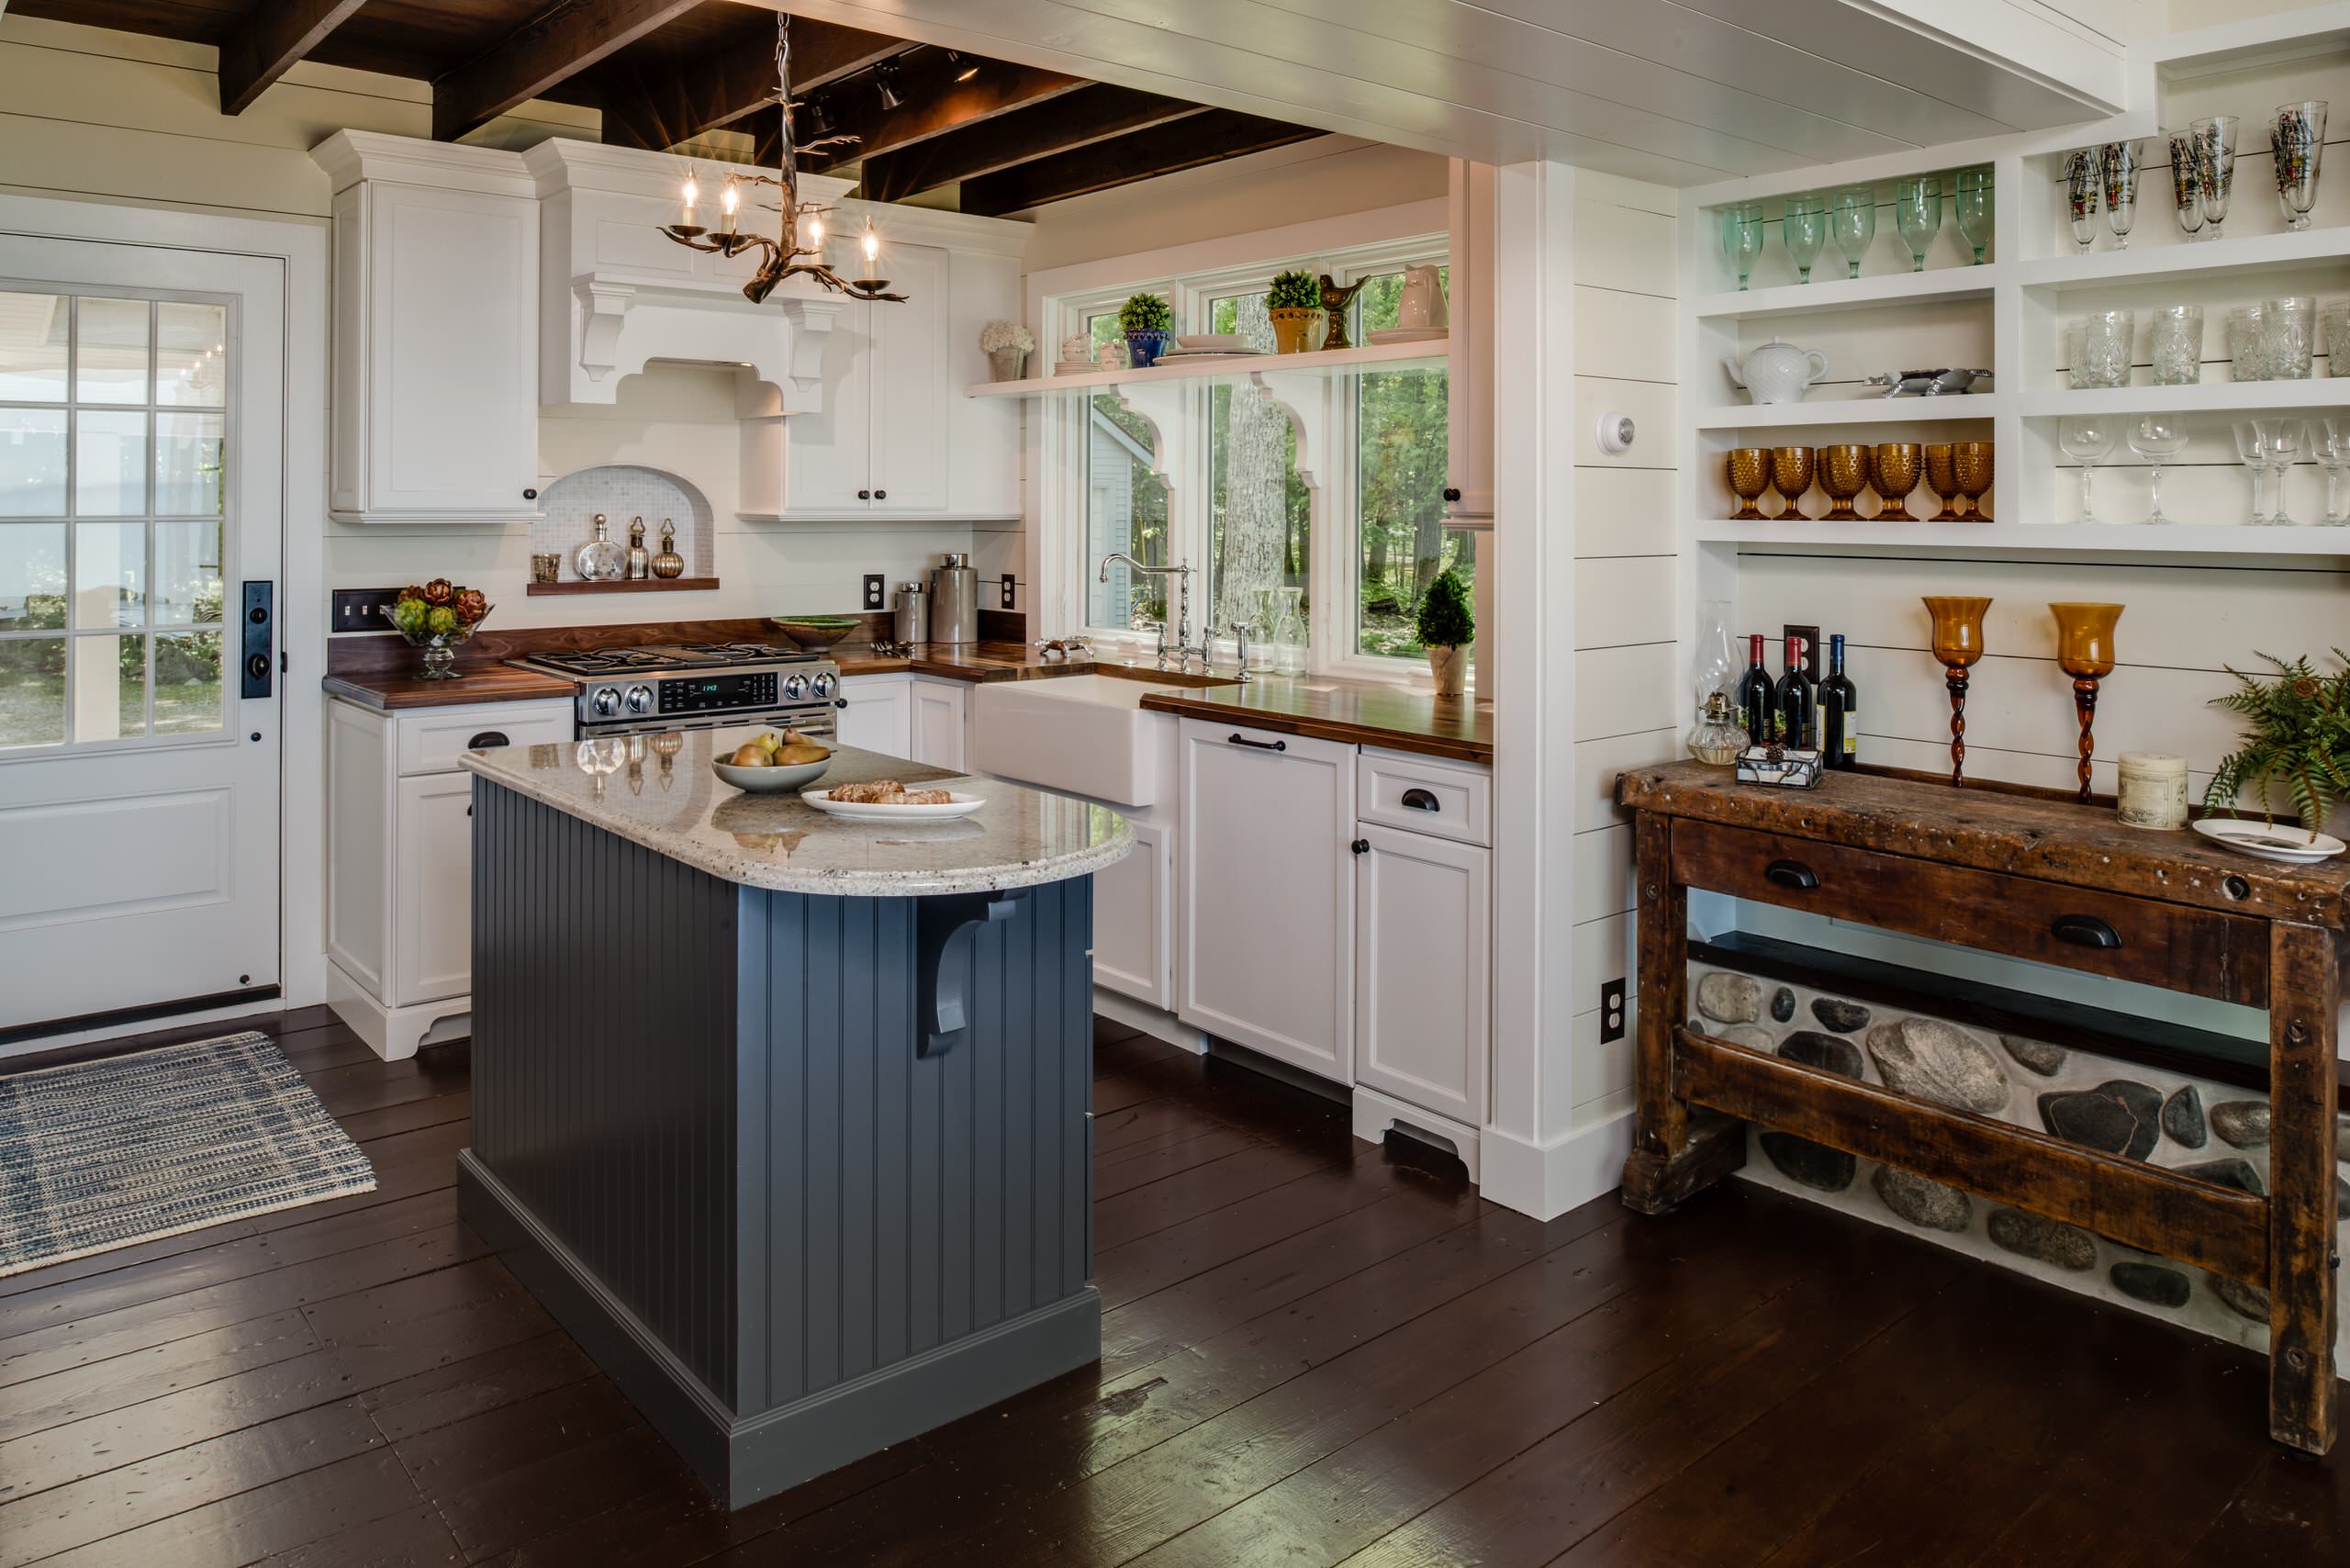 18 Small Rustic Kitchen Ideas You'll Love   August, 18   Houzz